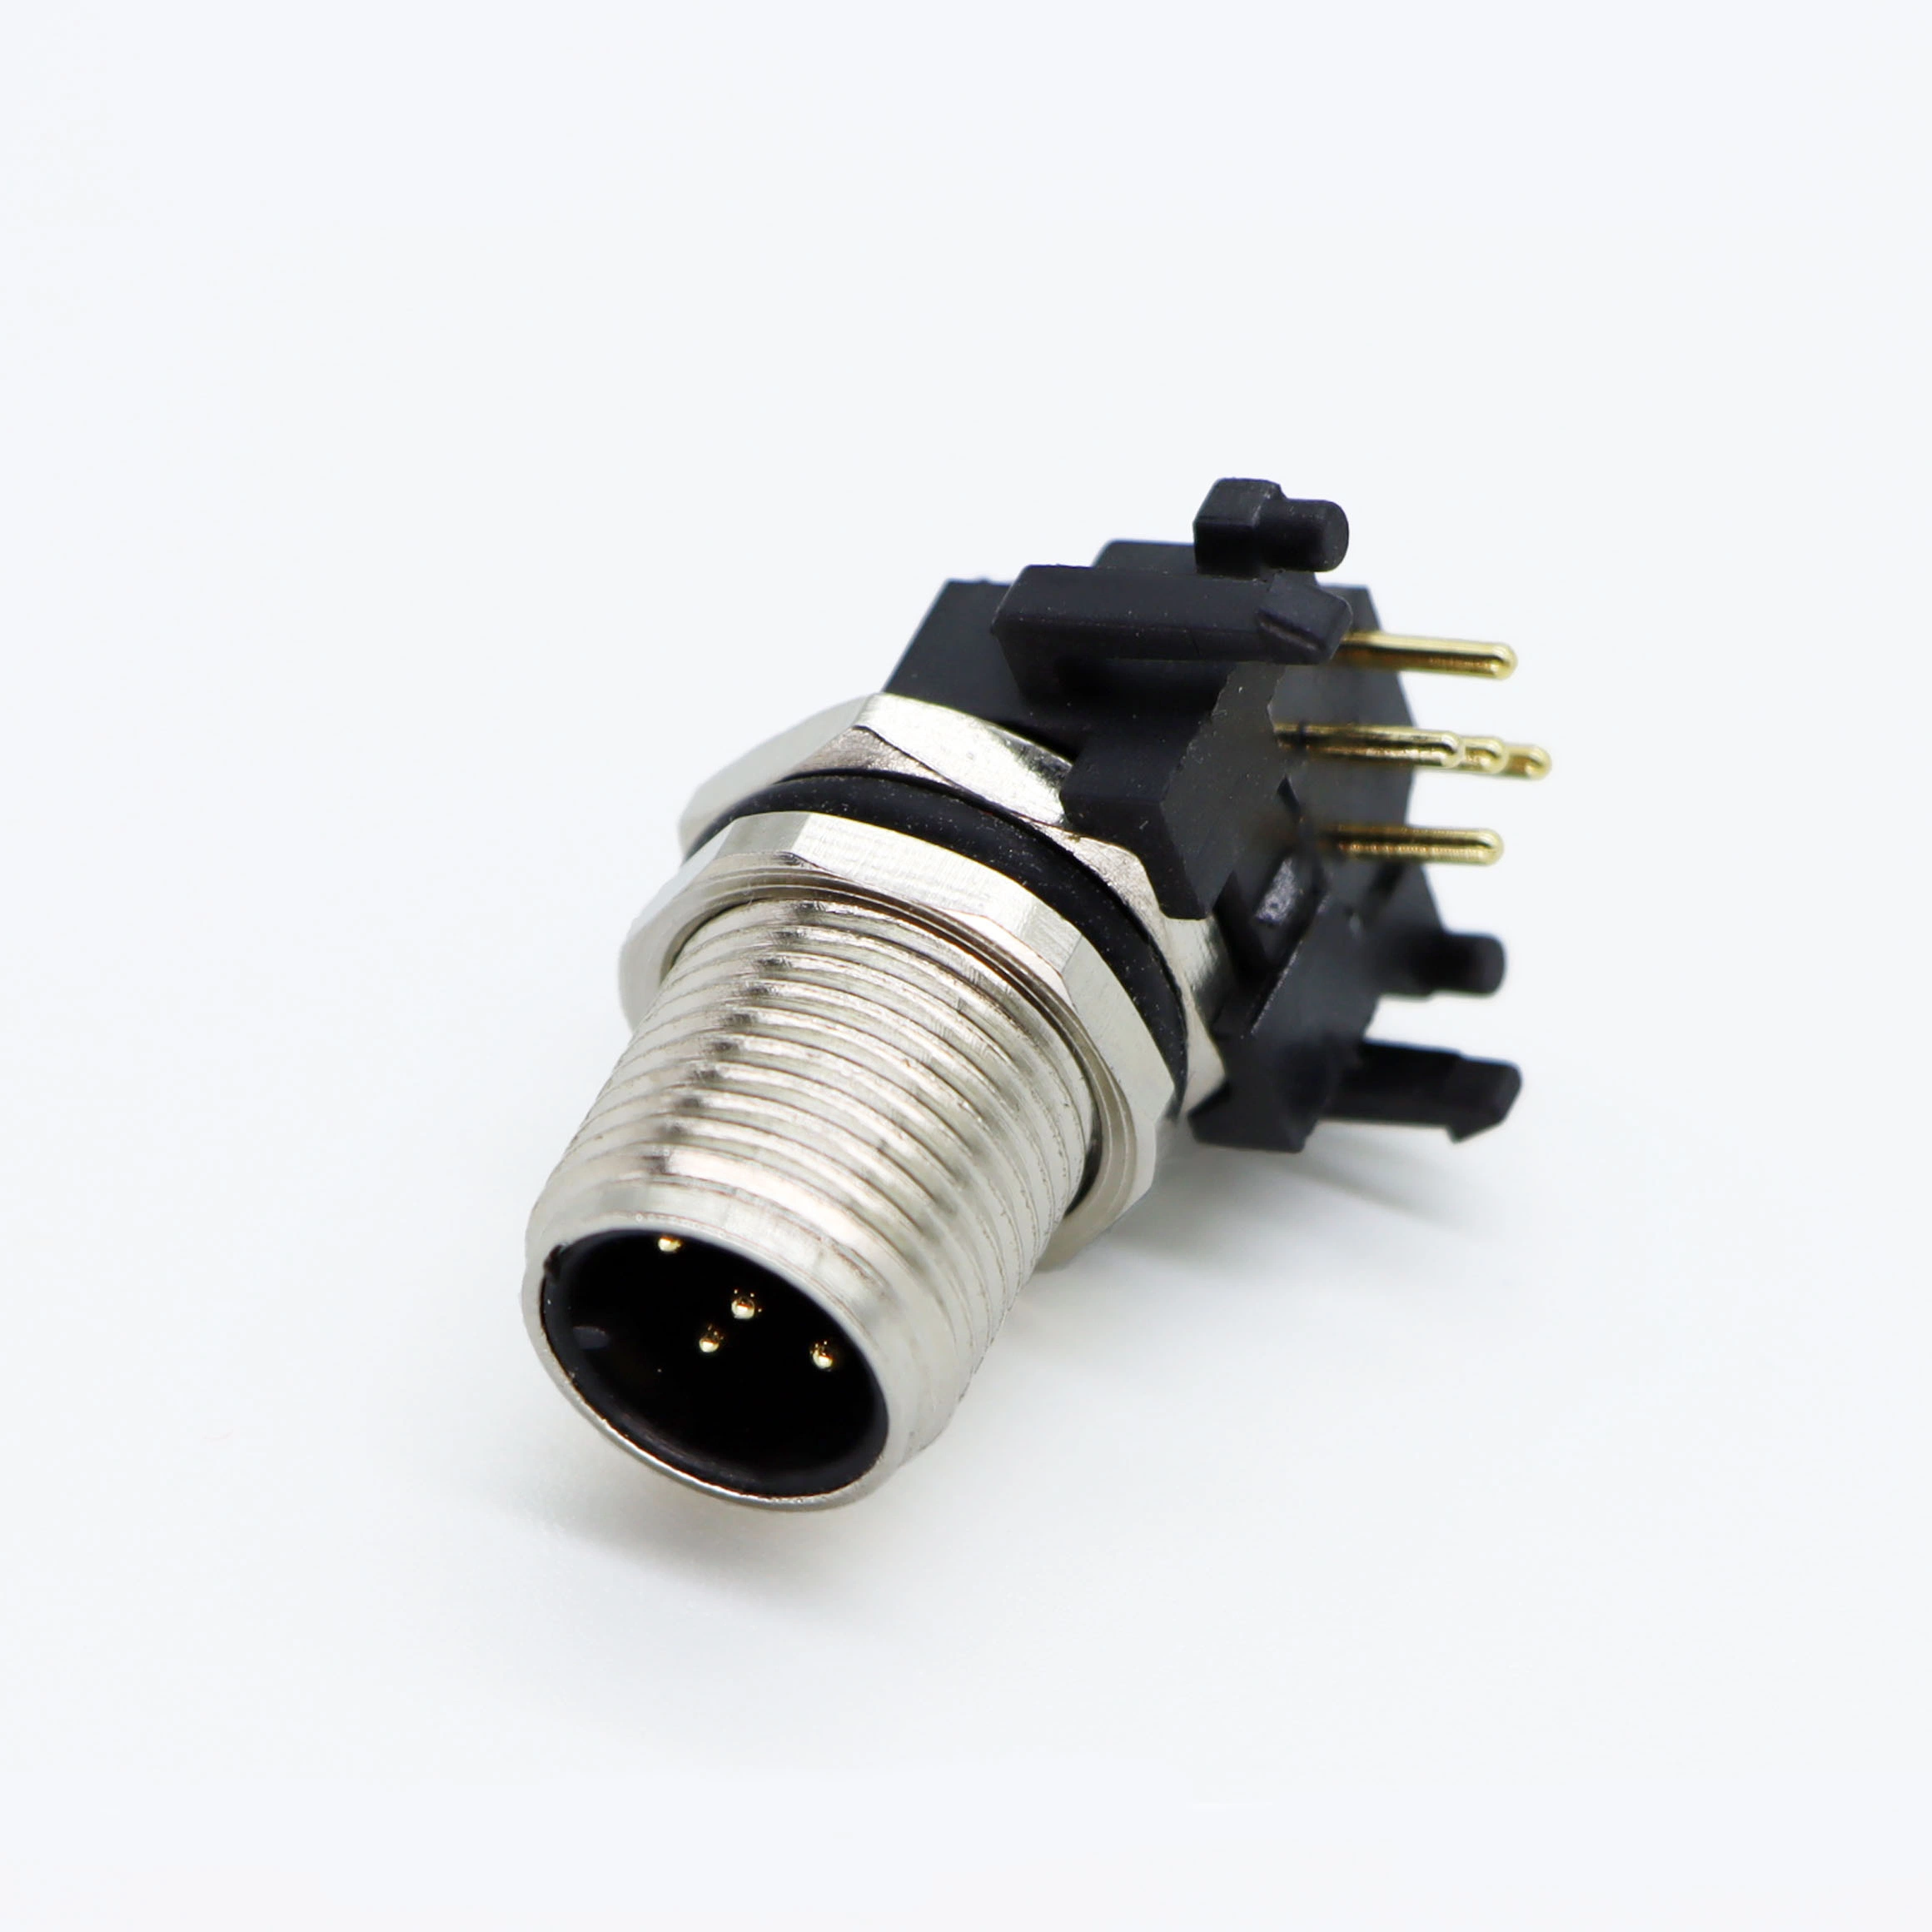 M12 Bent Pin Socket Connector Elbow PCB Waterproof Connector Solder Plate Connector Male and Female Socket Supply